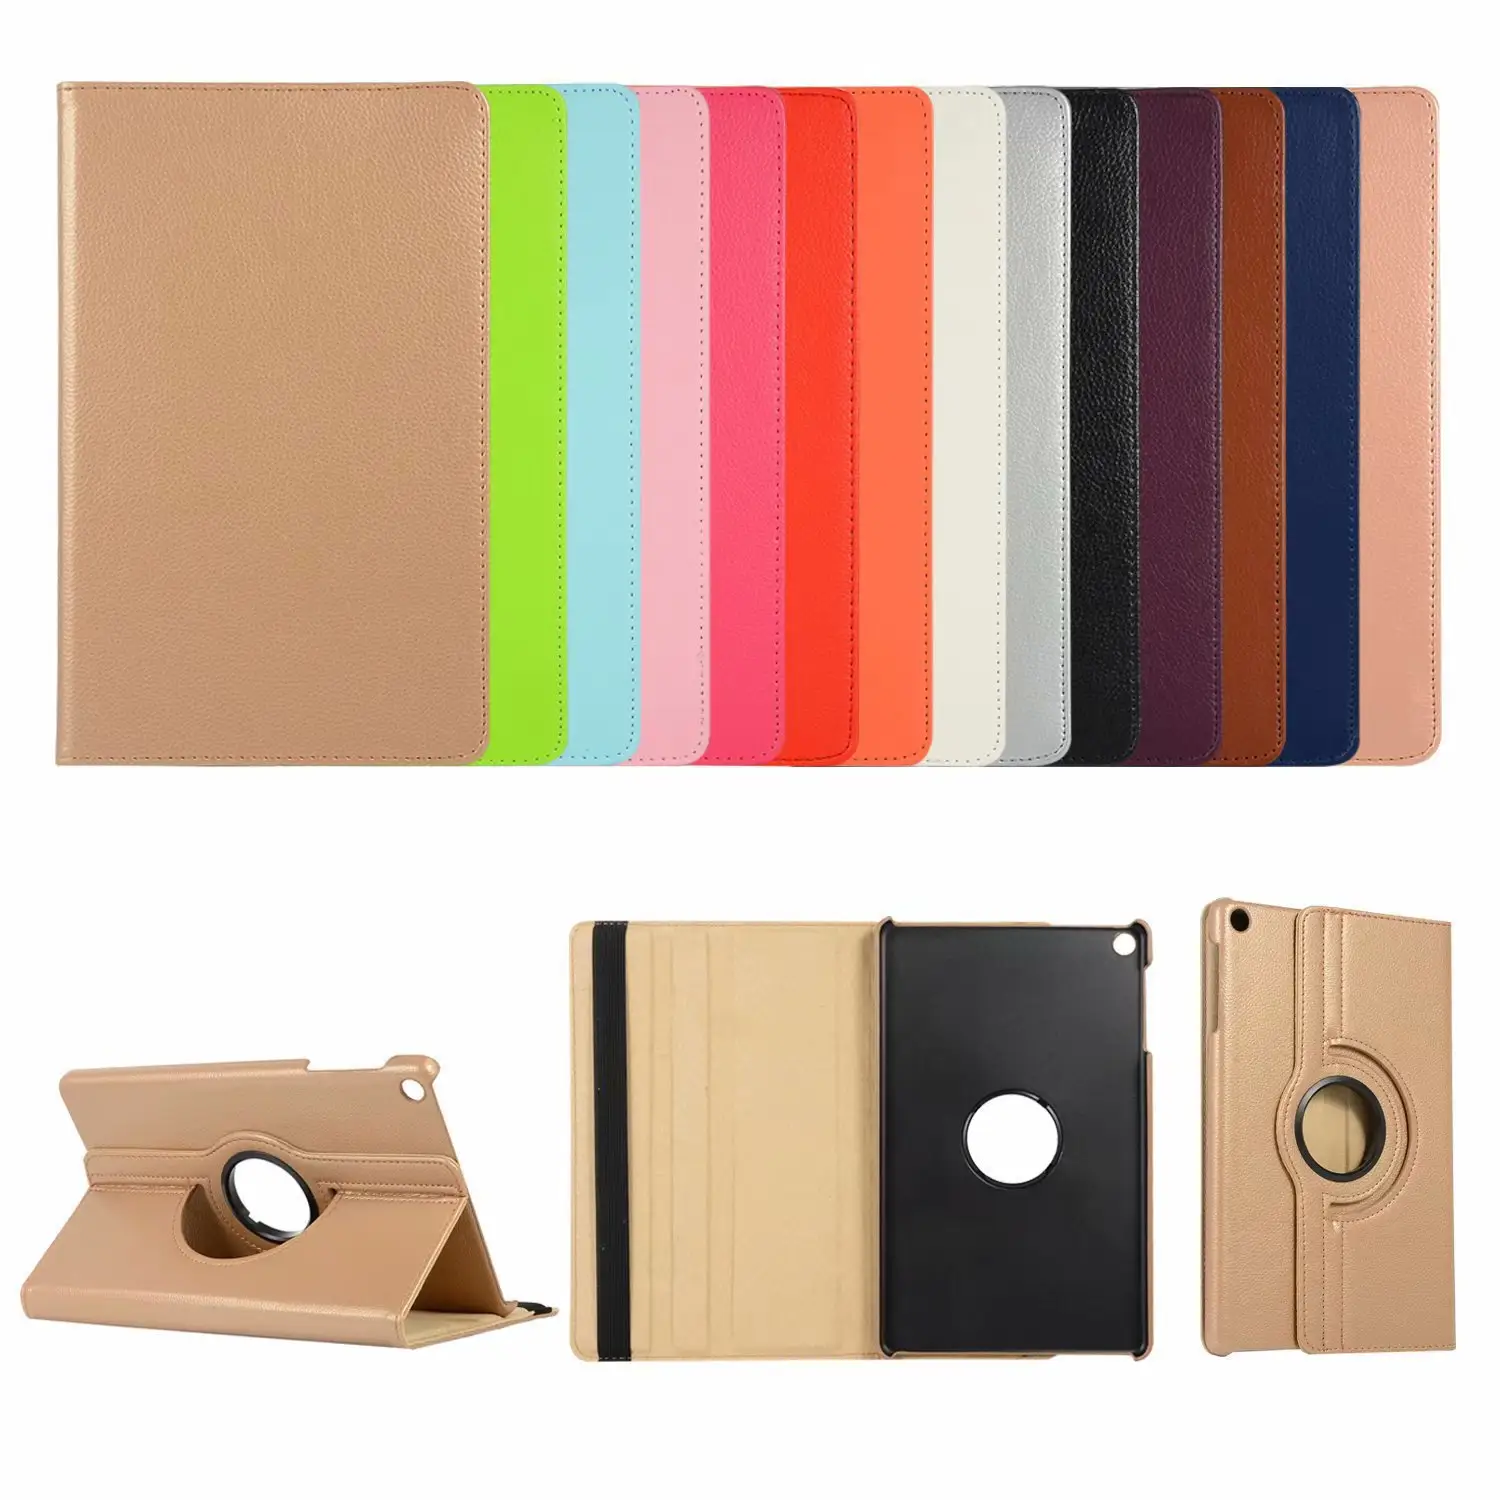 360 Rotating Case for Samsung Galaxy Tab A 7.0 T280/T285 (7 Inch) Smart PU Leather Tablet Cover